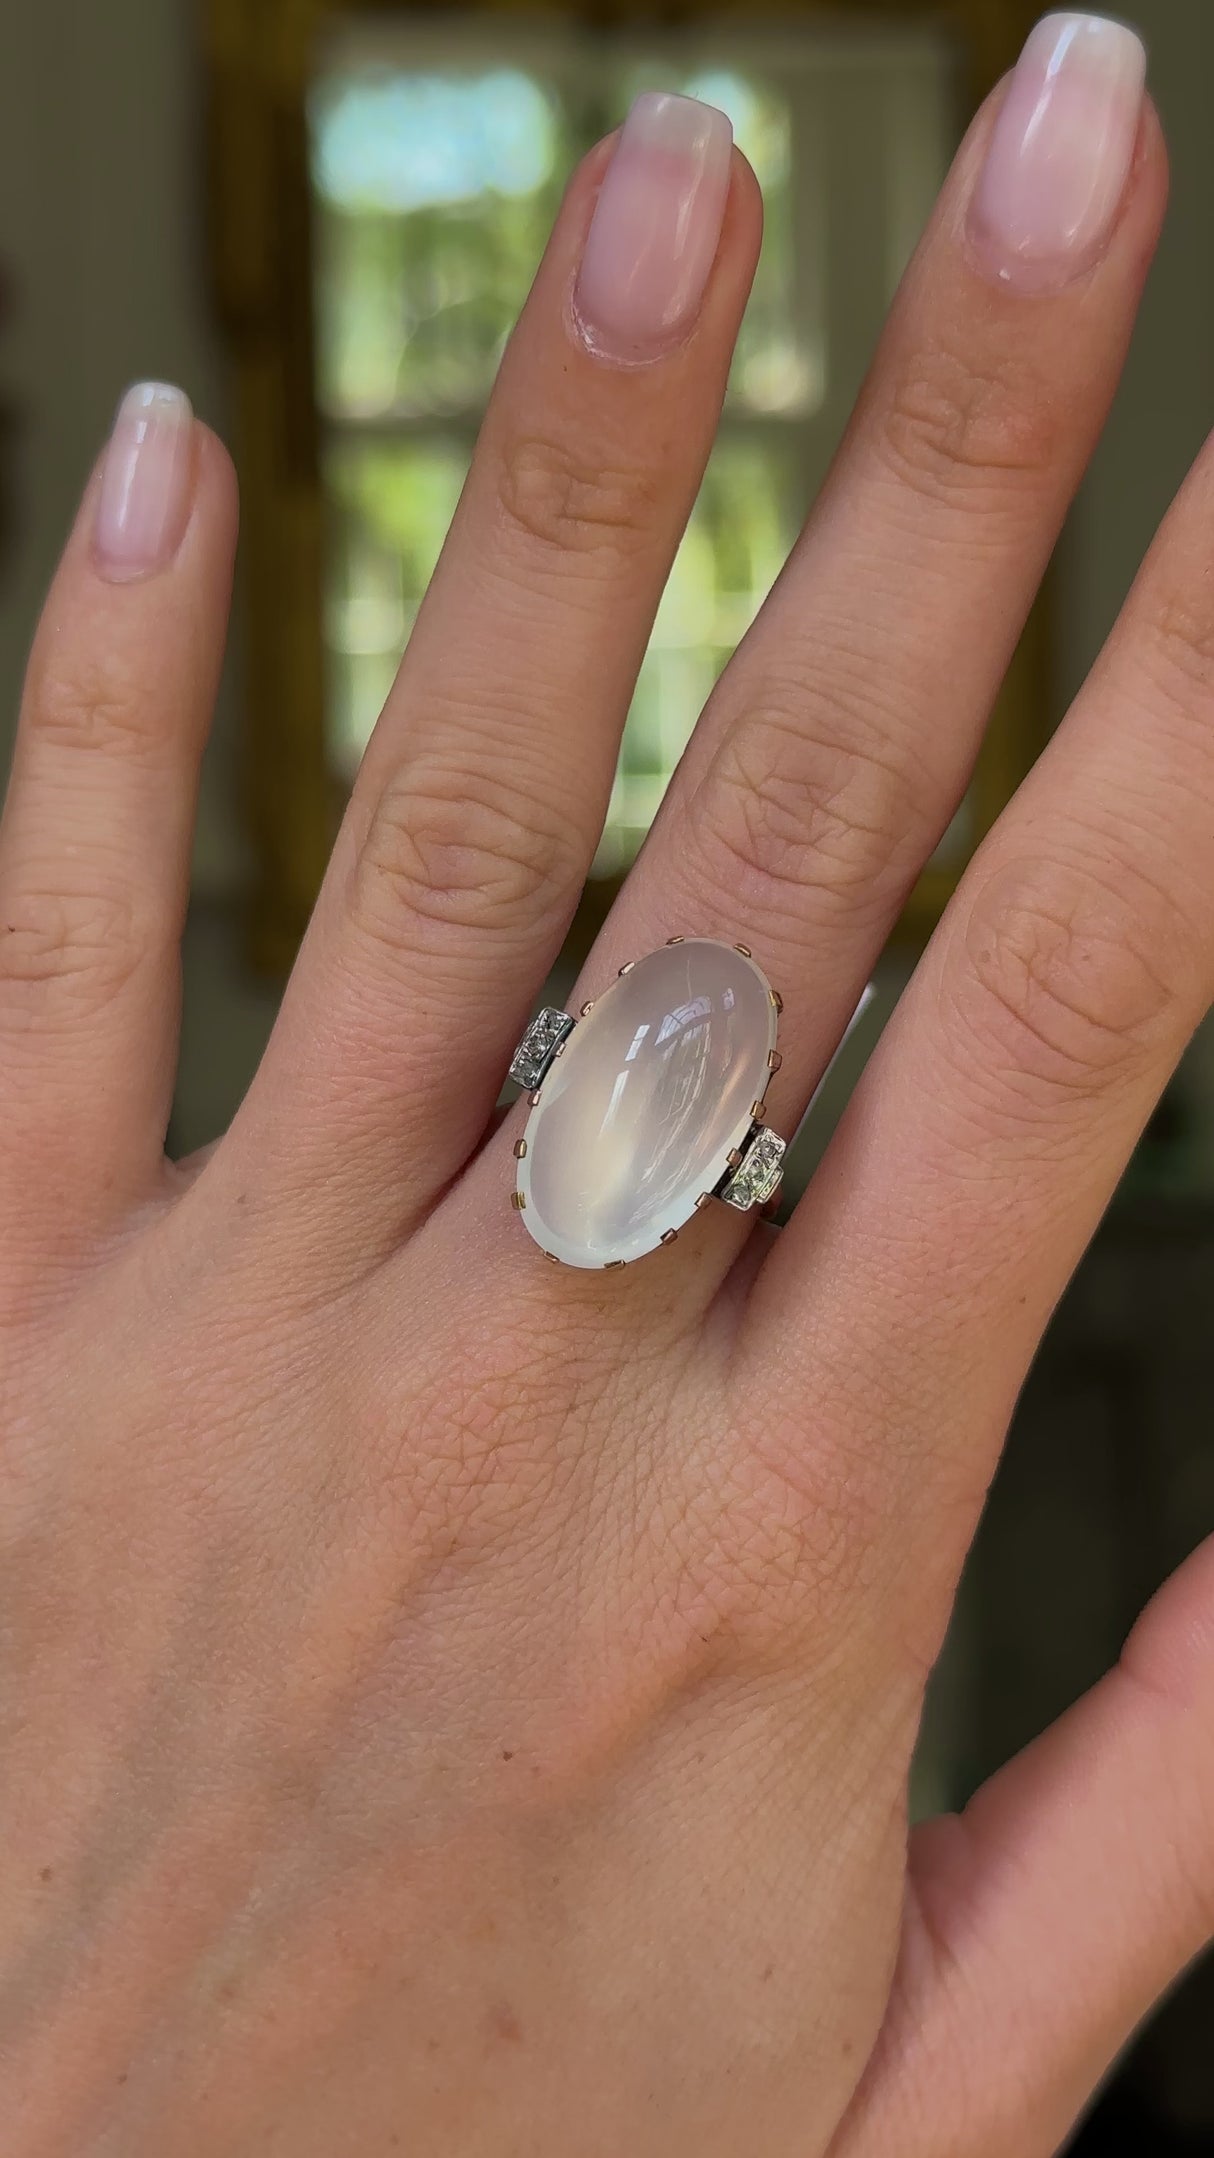 Moonstone and diamond ring, worn on hand and moved around to give perspective.